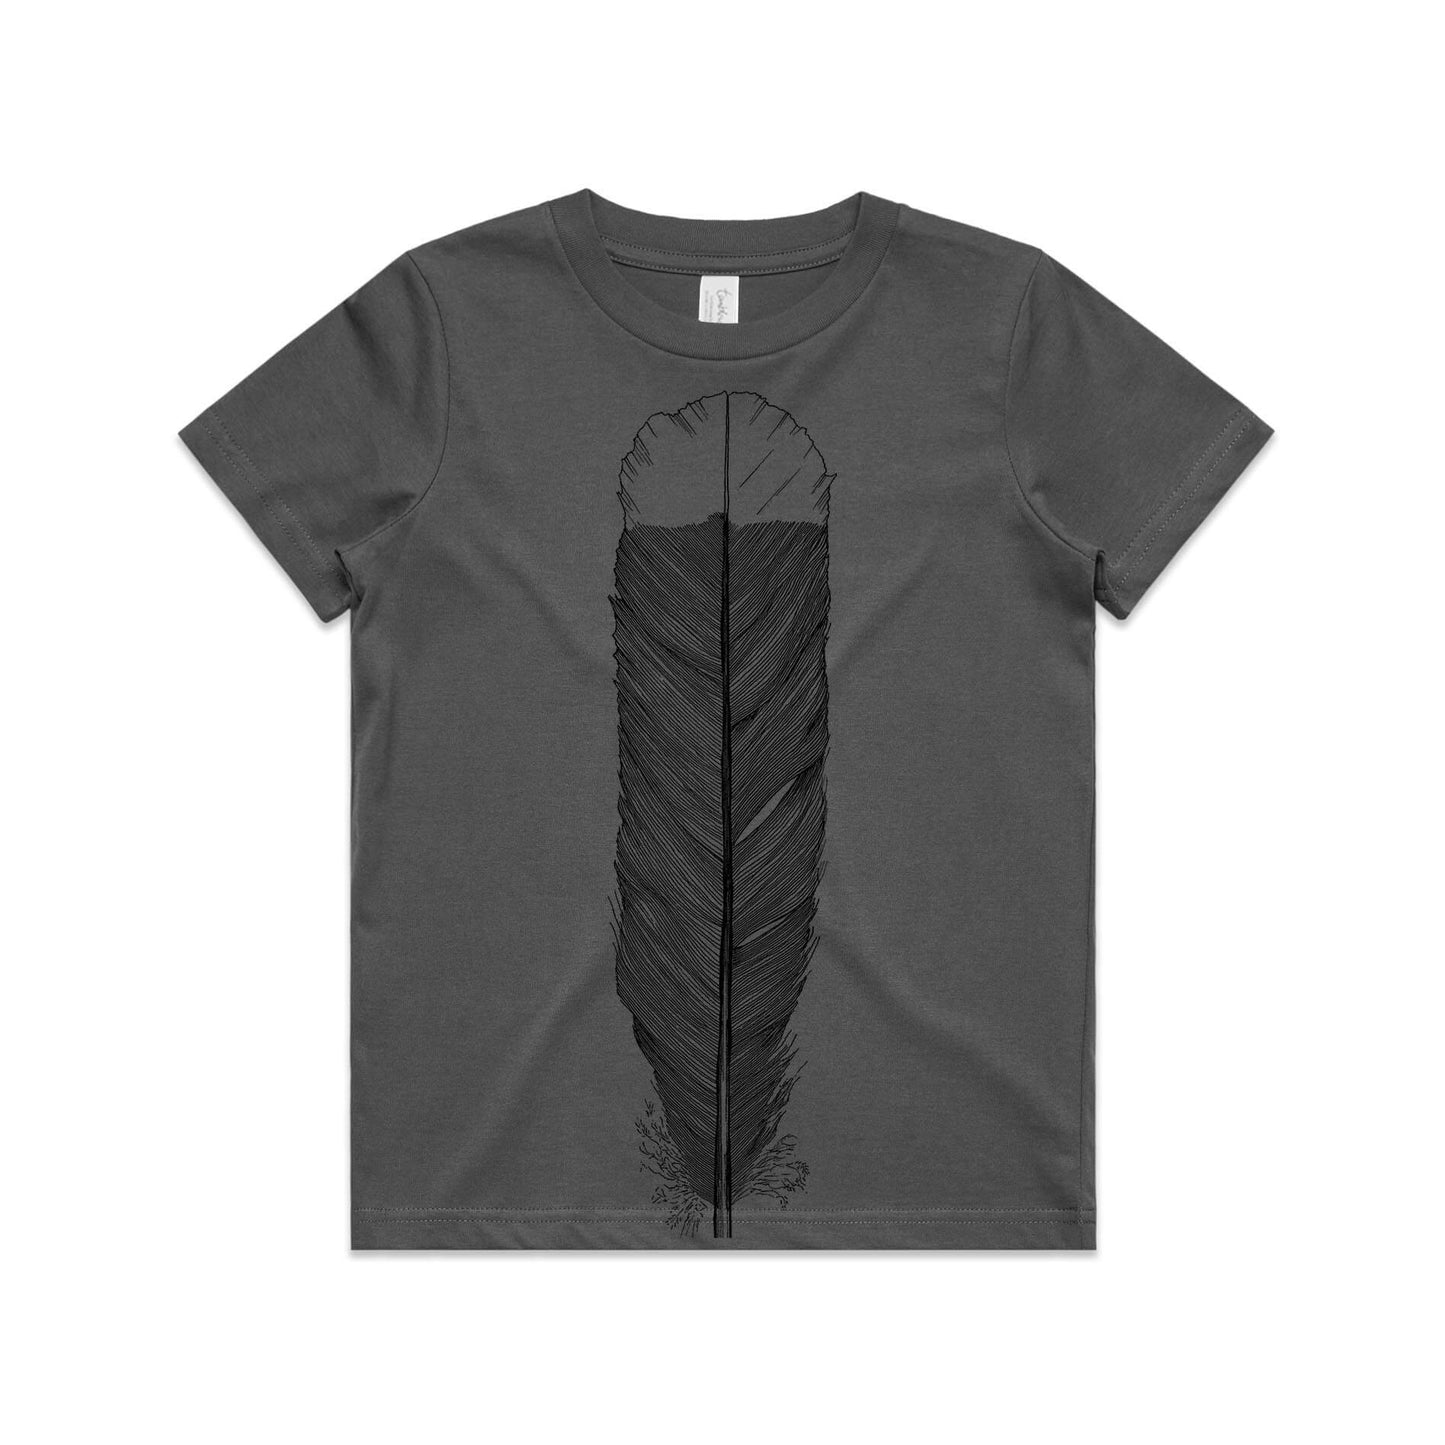 Charcoal, cotton kids' t-shirt with screen printed Kids huia feather design.